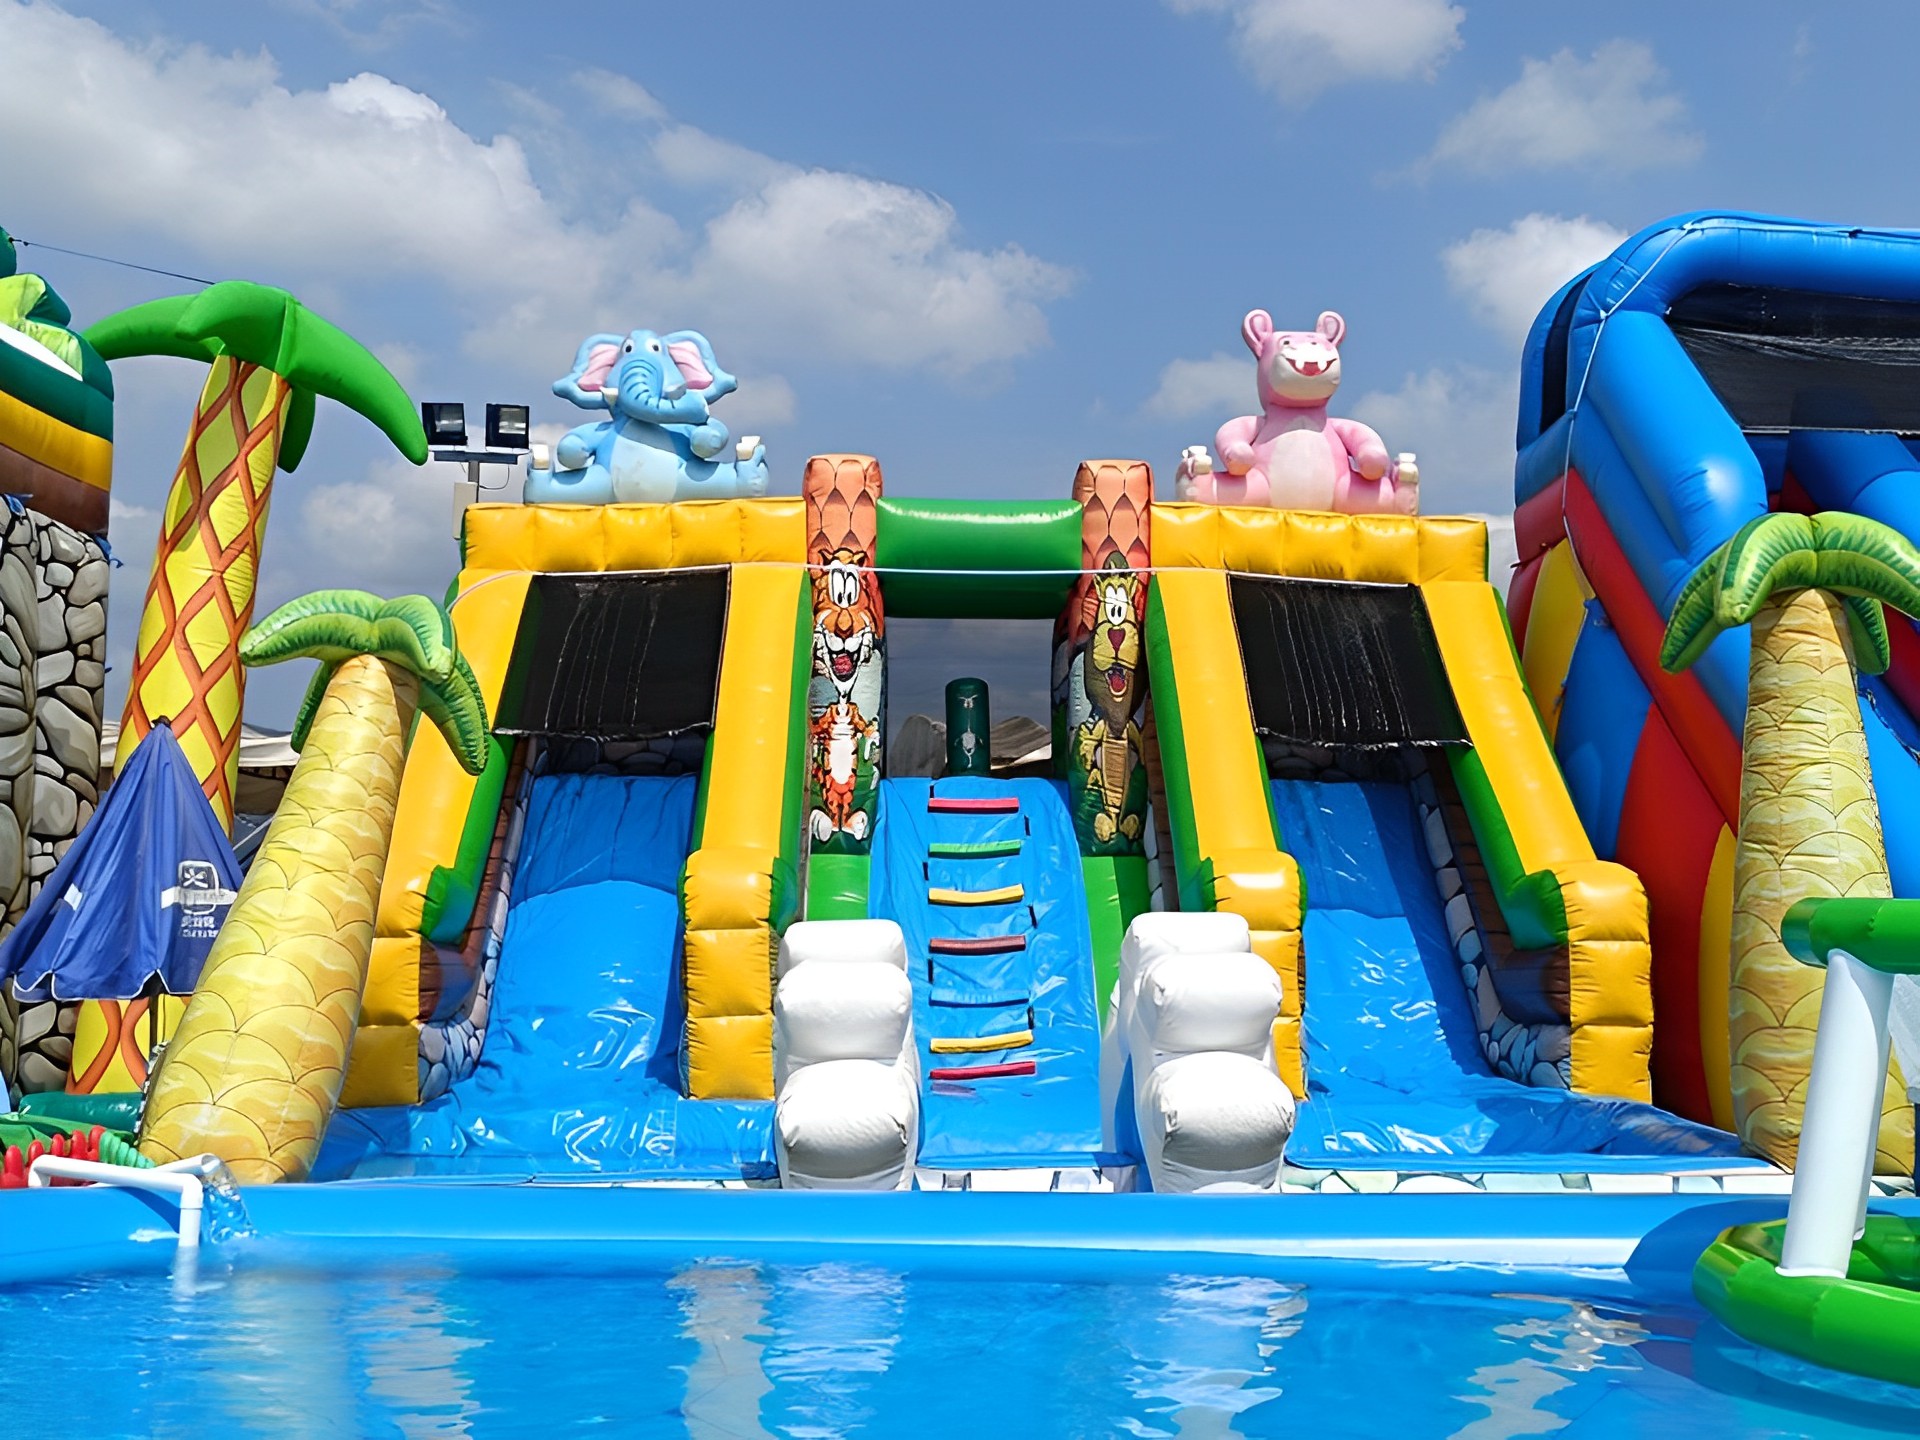 Make a splash with the enormous water slides at Fun Fun Inflatable Water World.